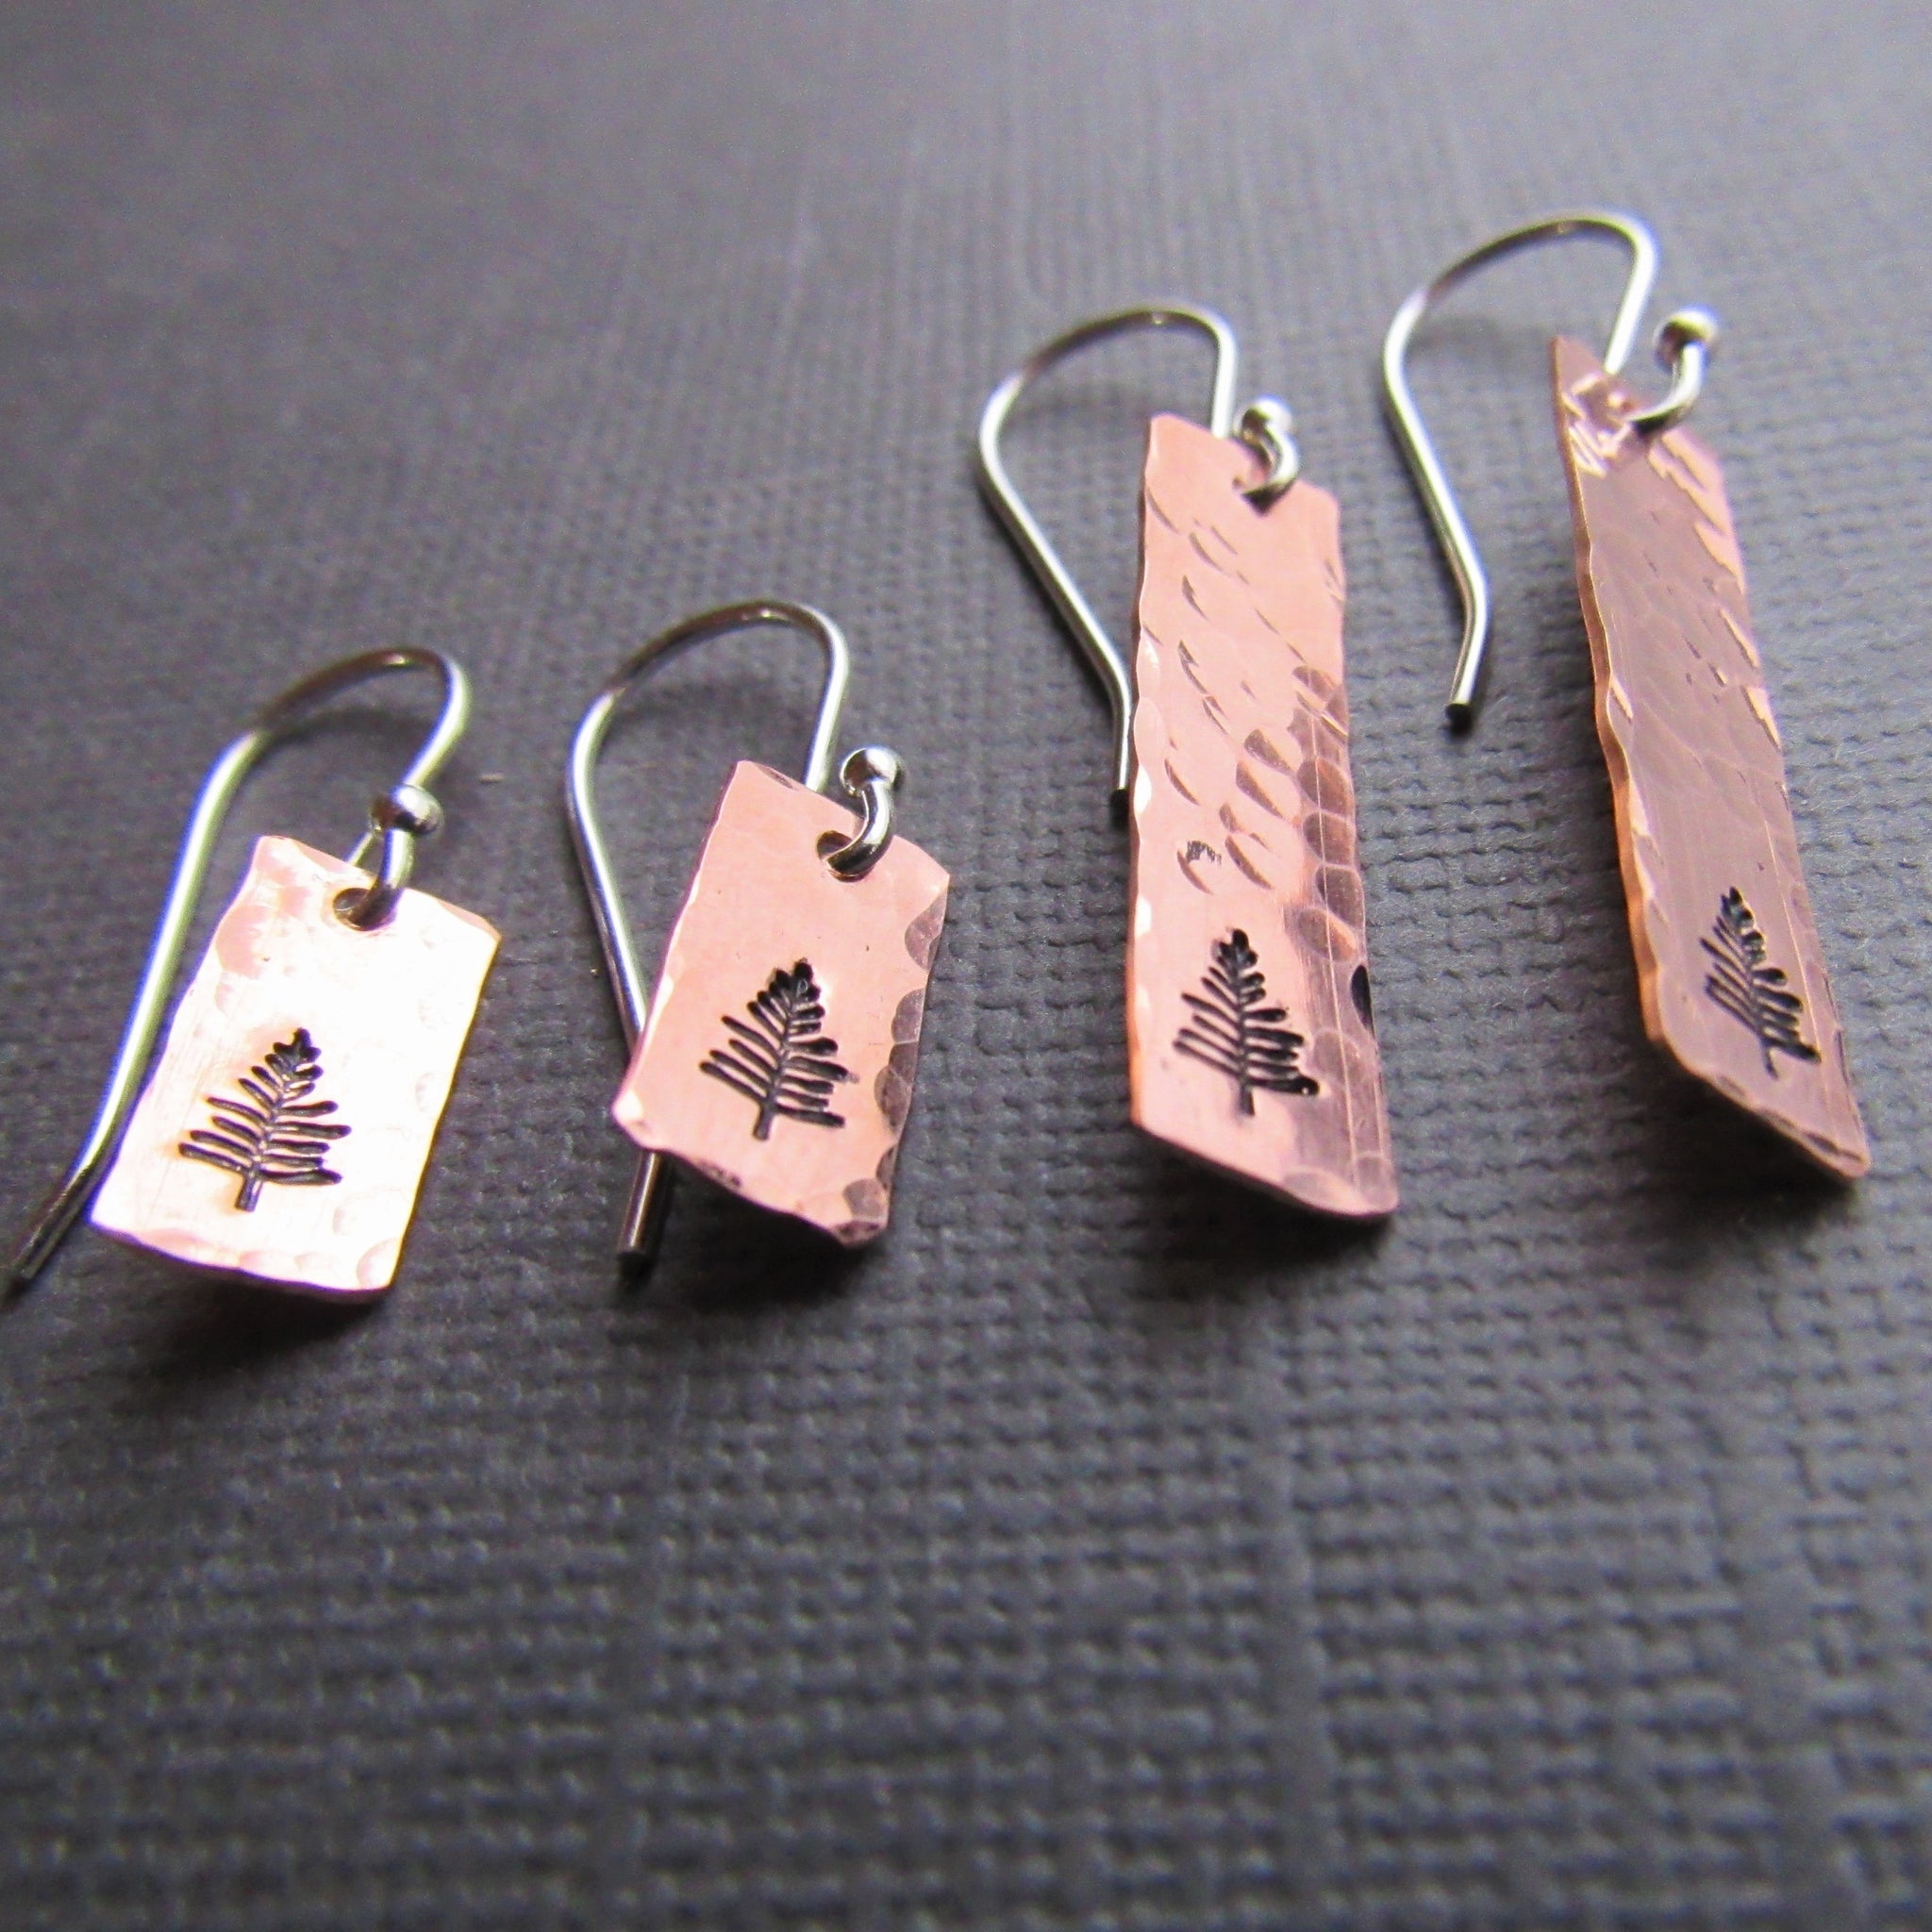 Copper Stick Style Earrings with Stamped Evergreen Tree